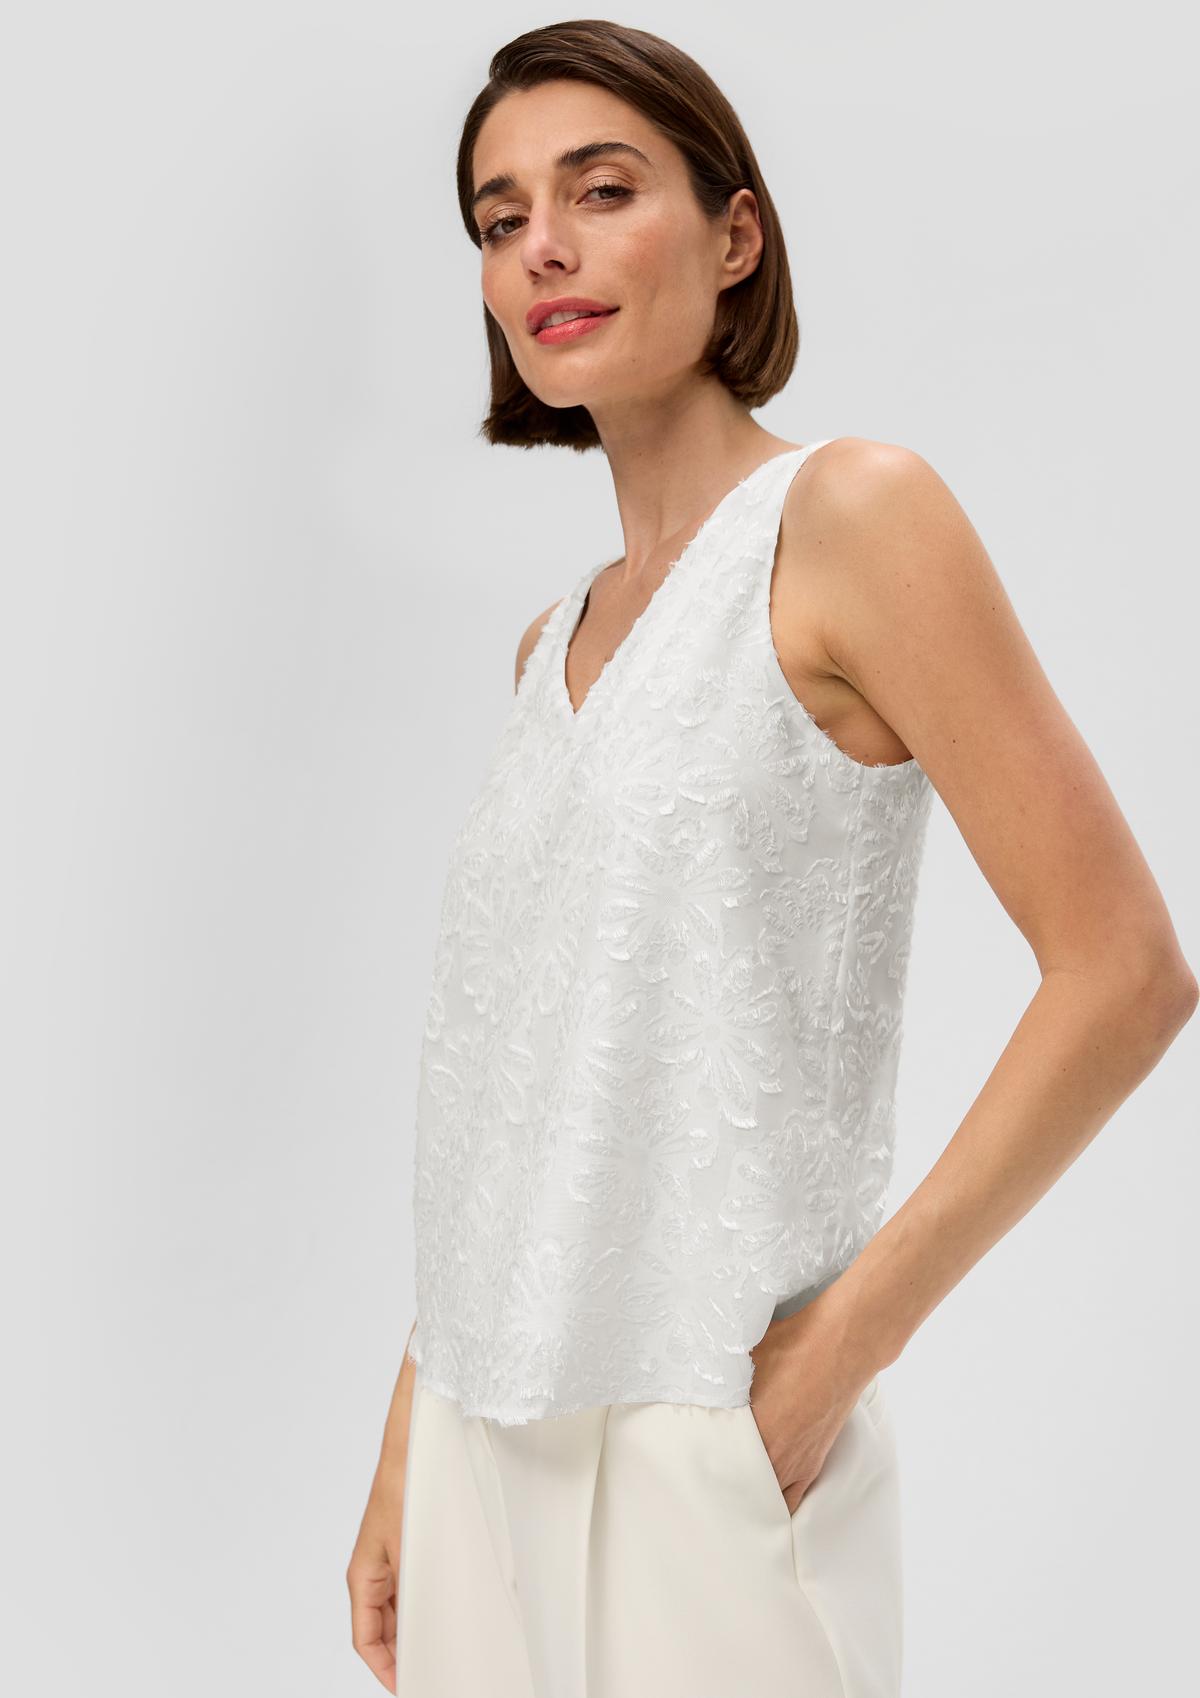 T-shirt with chiffon patterned texture